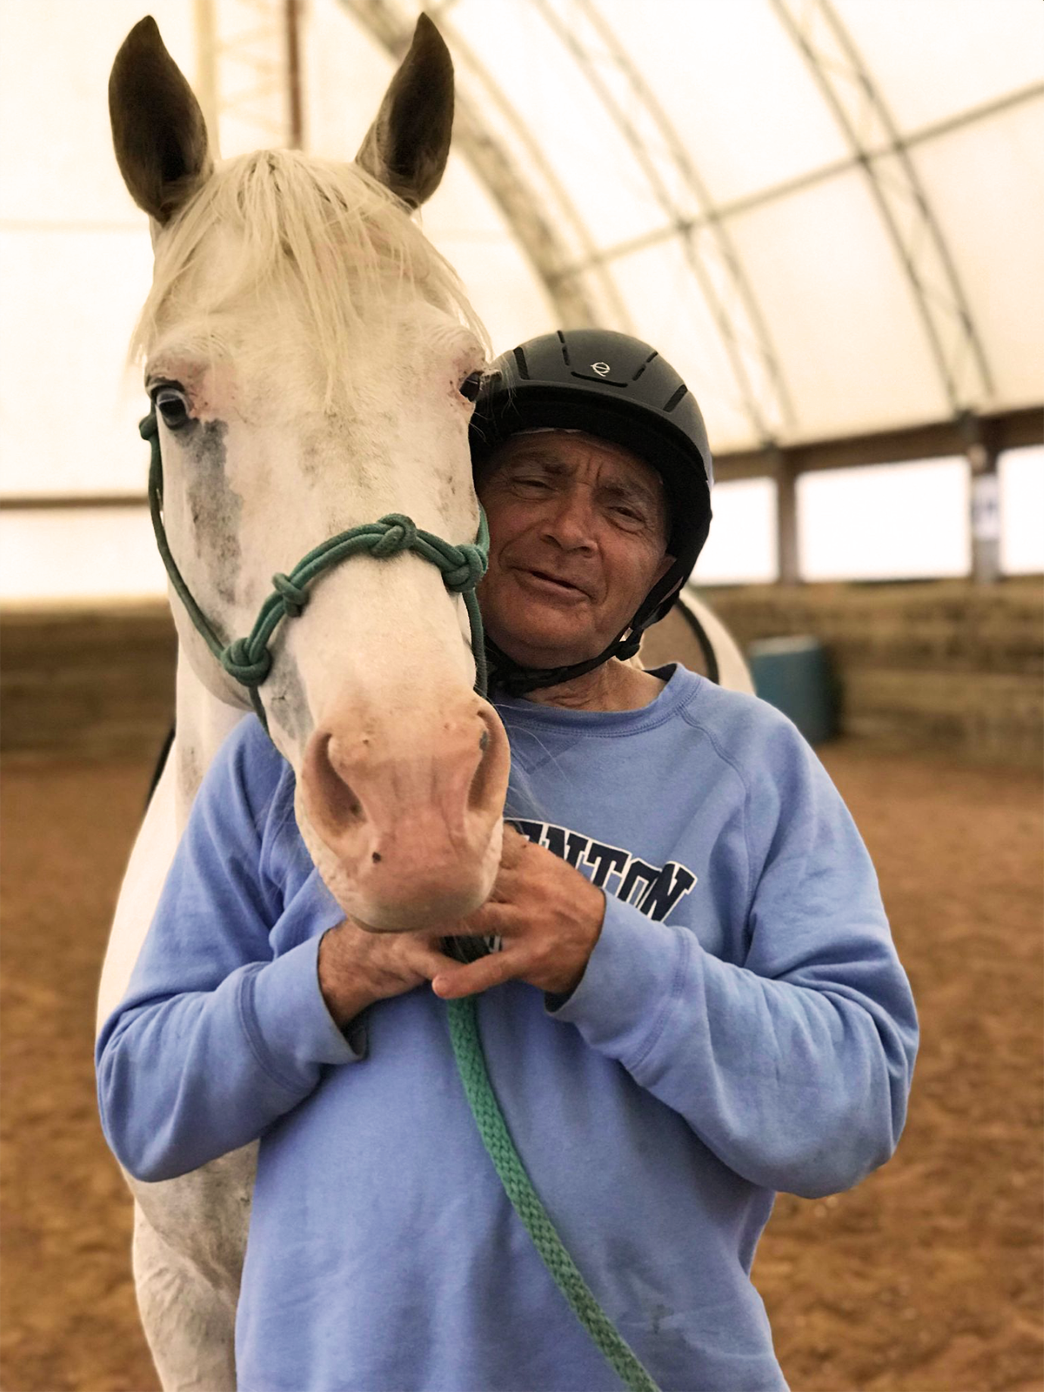 A man stands with a horse in the riding stable. Our equestrian programs are a great way to have fun and build self-confidence.